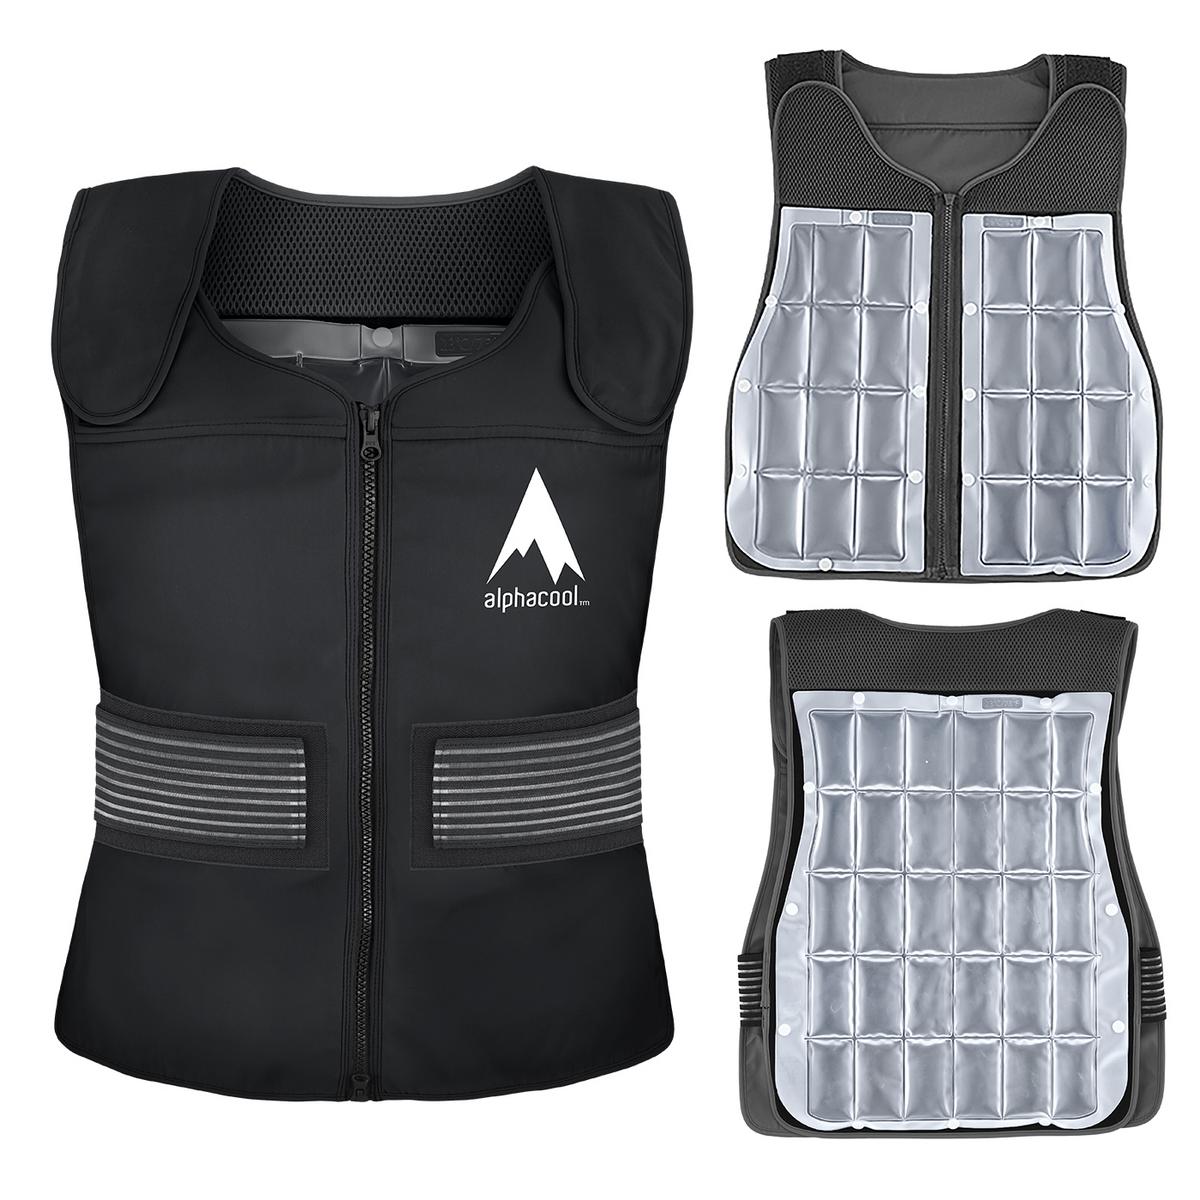 AlphaCool Tundra Phase Change Cooling Vest - Battery